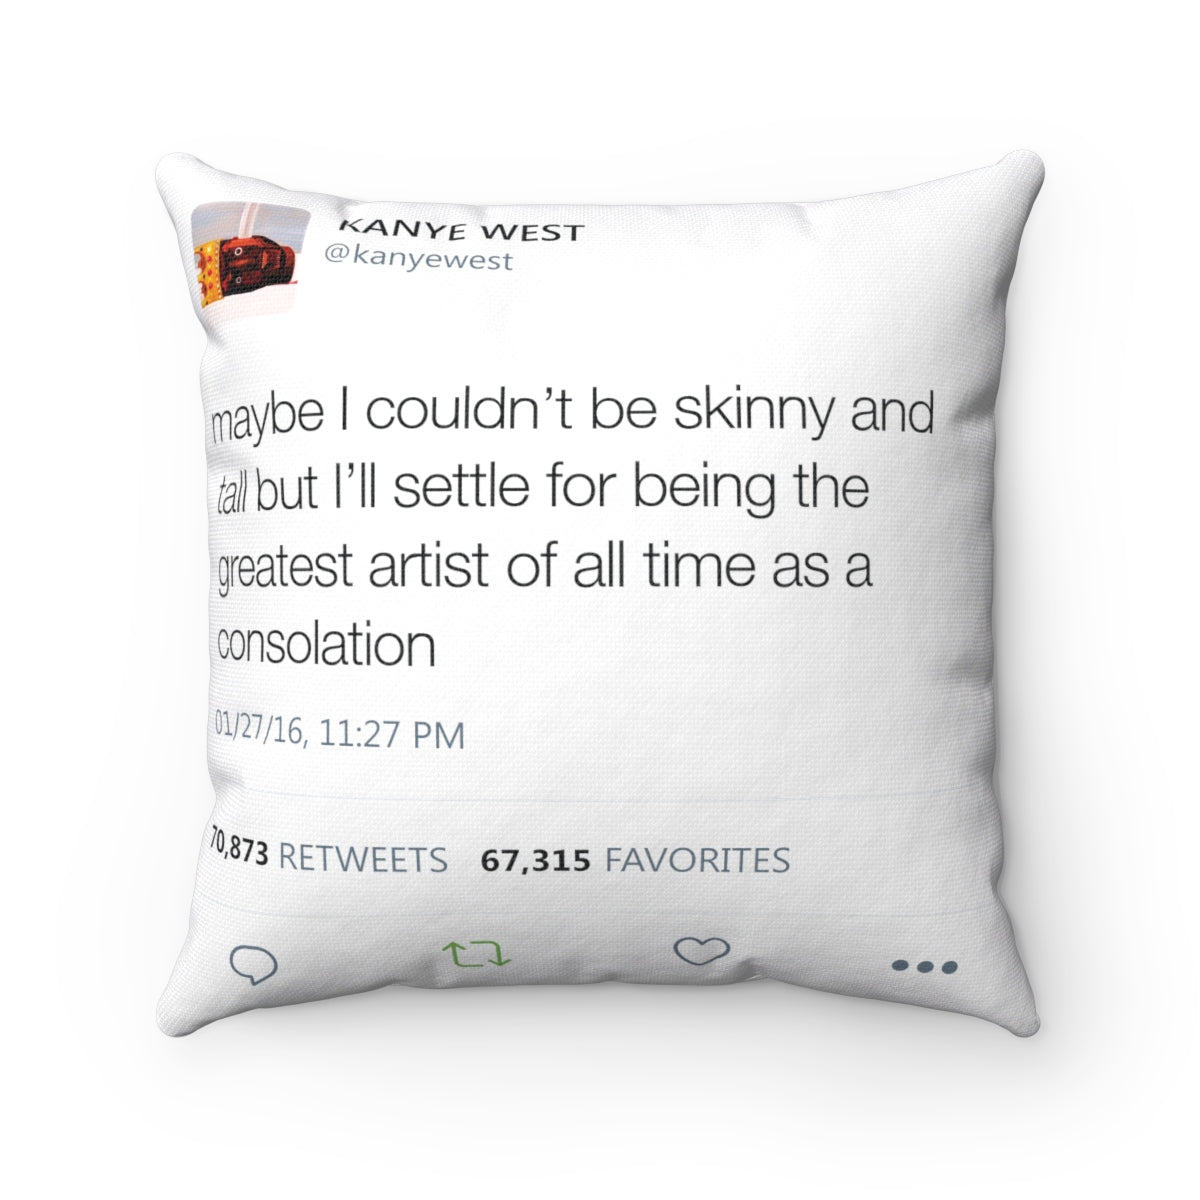 Maybe I Couldn't Be Skinny And Tall But I'll Settle For Being The Greatest Artist Of All Time.. Kanye West Tweet Square Pillow-14" x 14"-Archethype